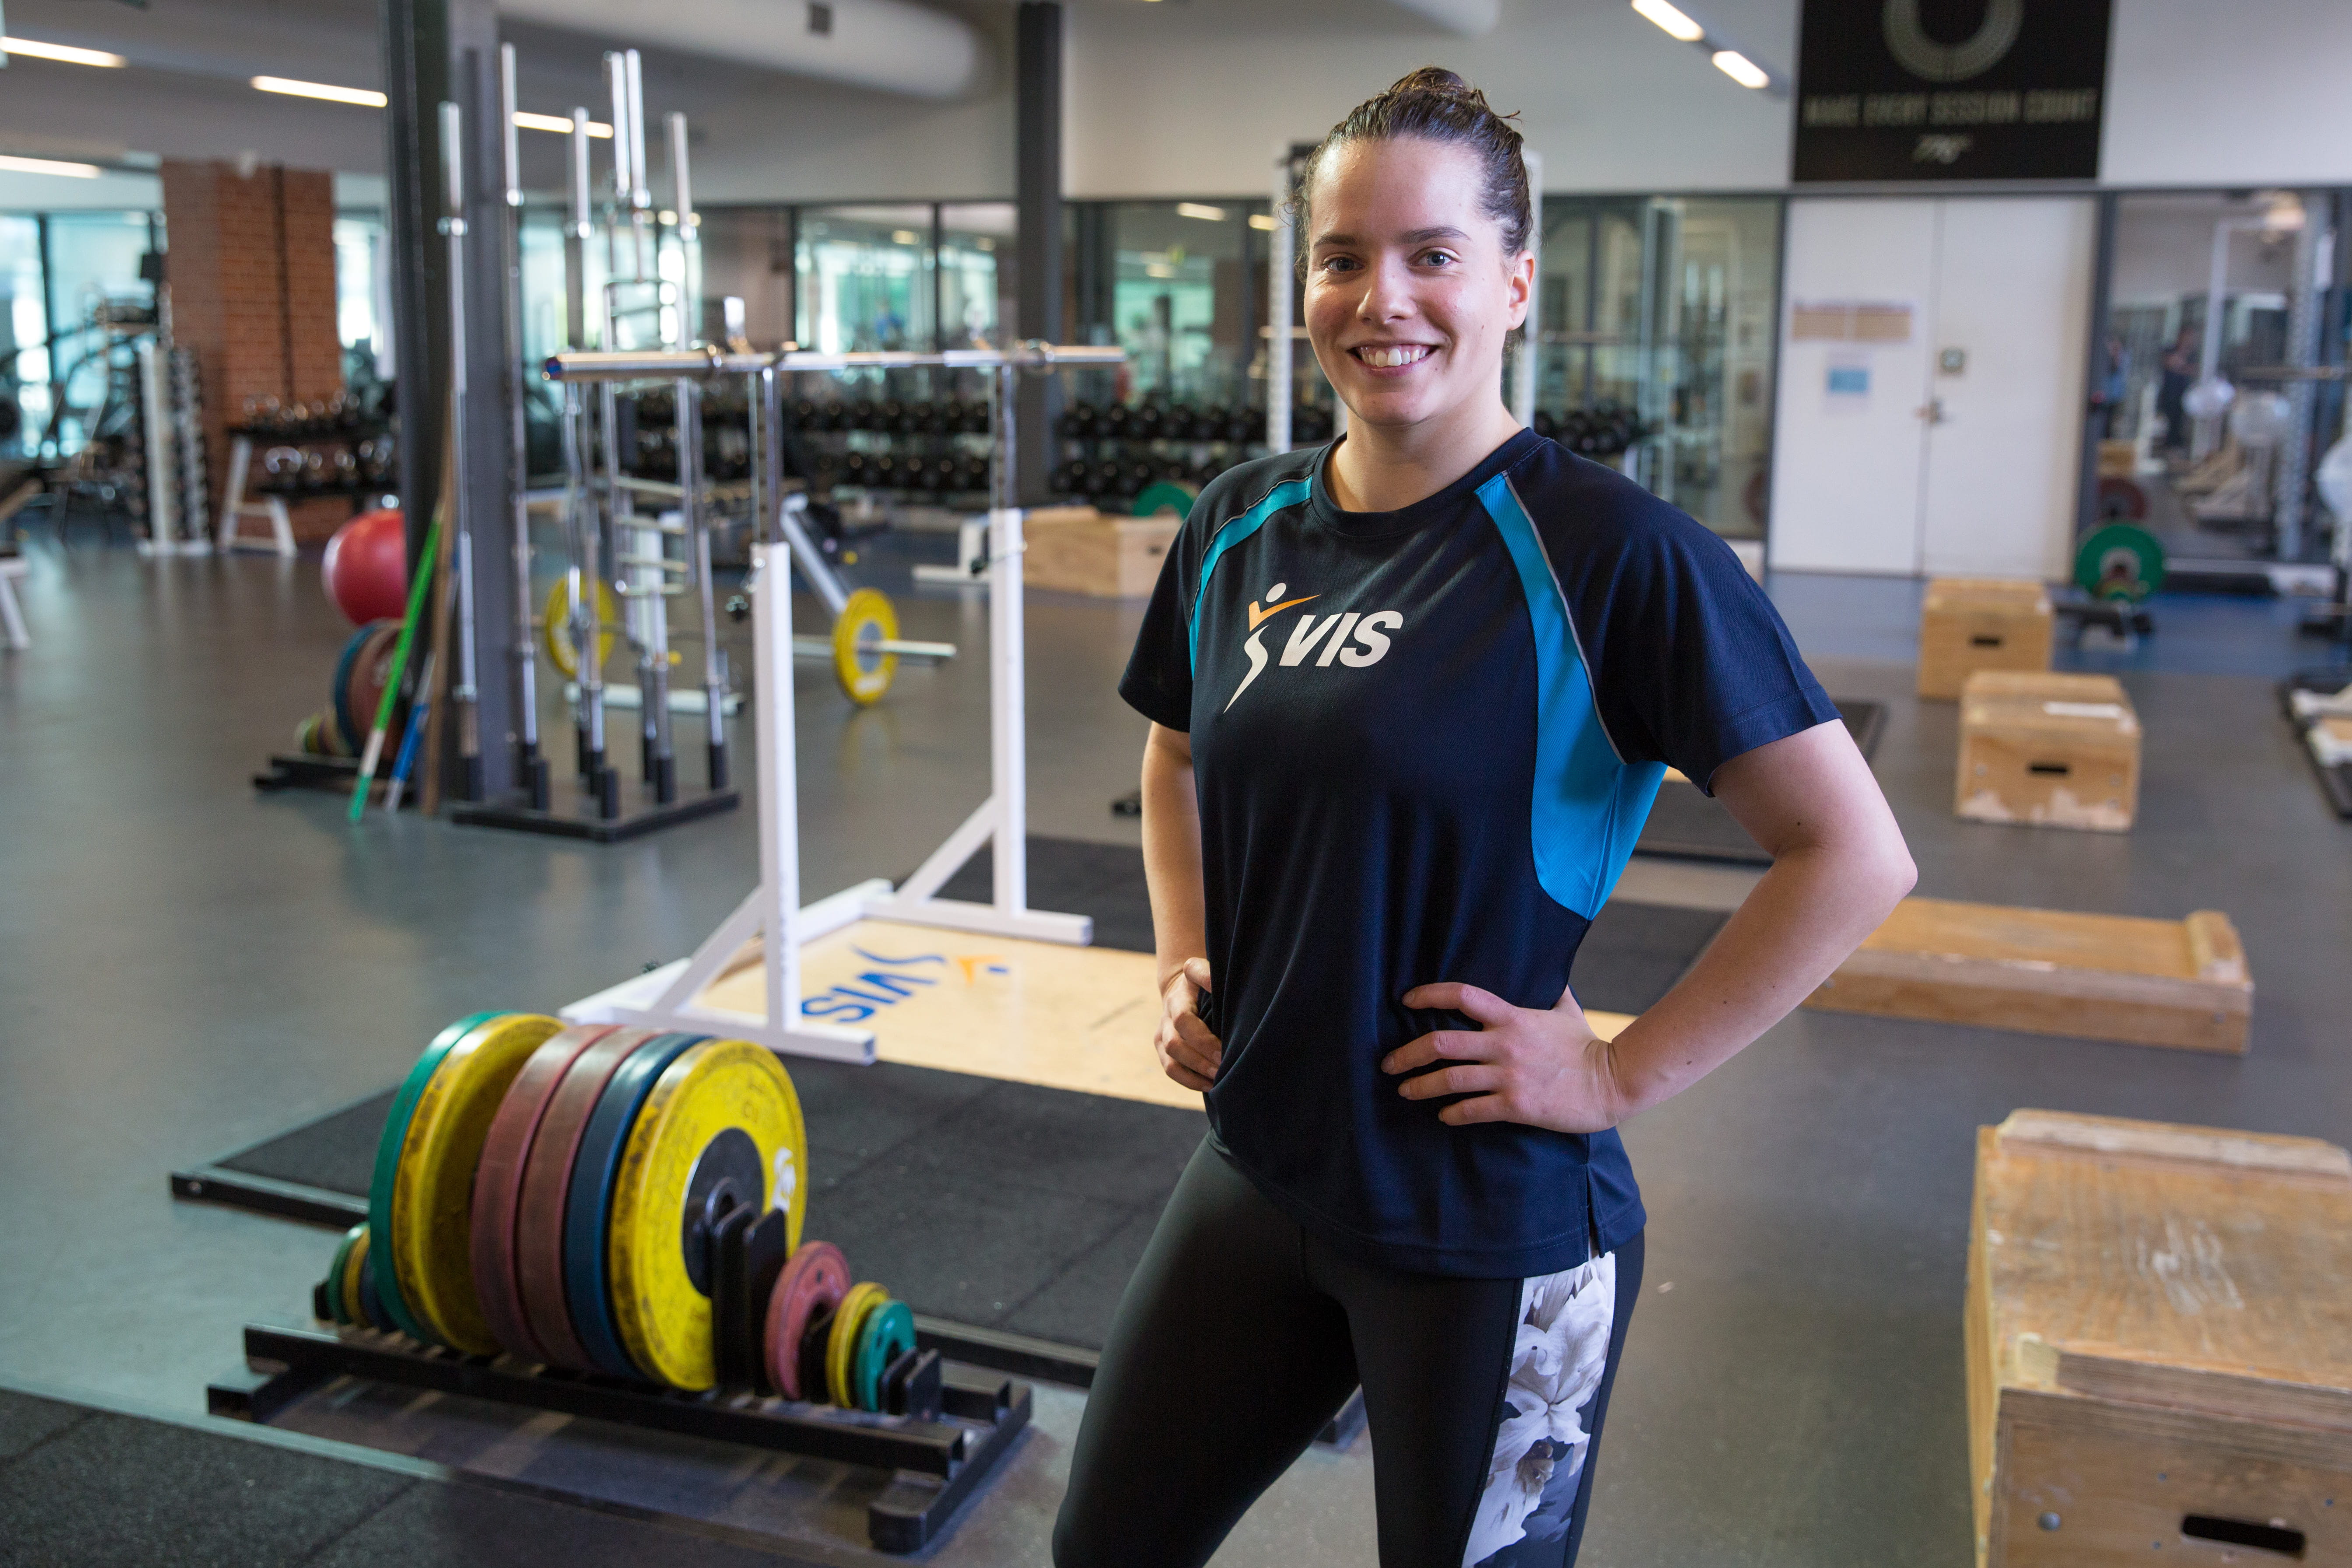 Victorian Institute of Sport supported athlete Anabelle Smith in the gym